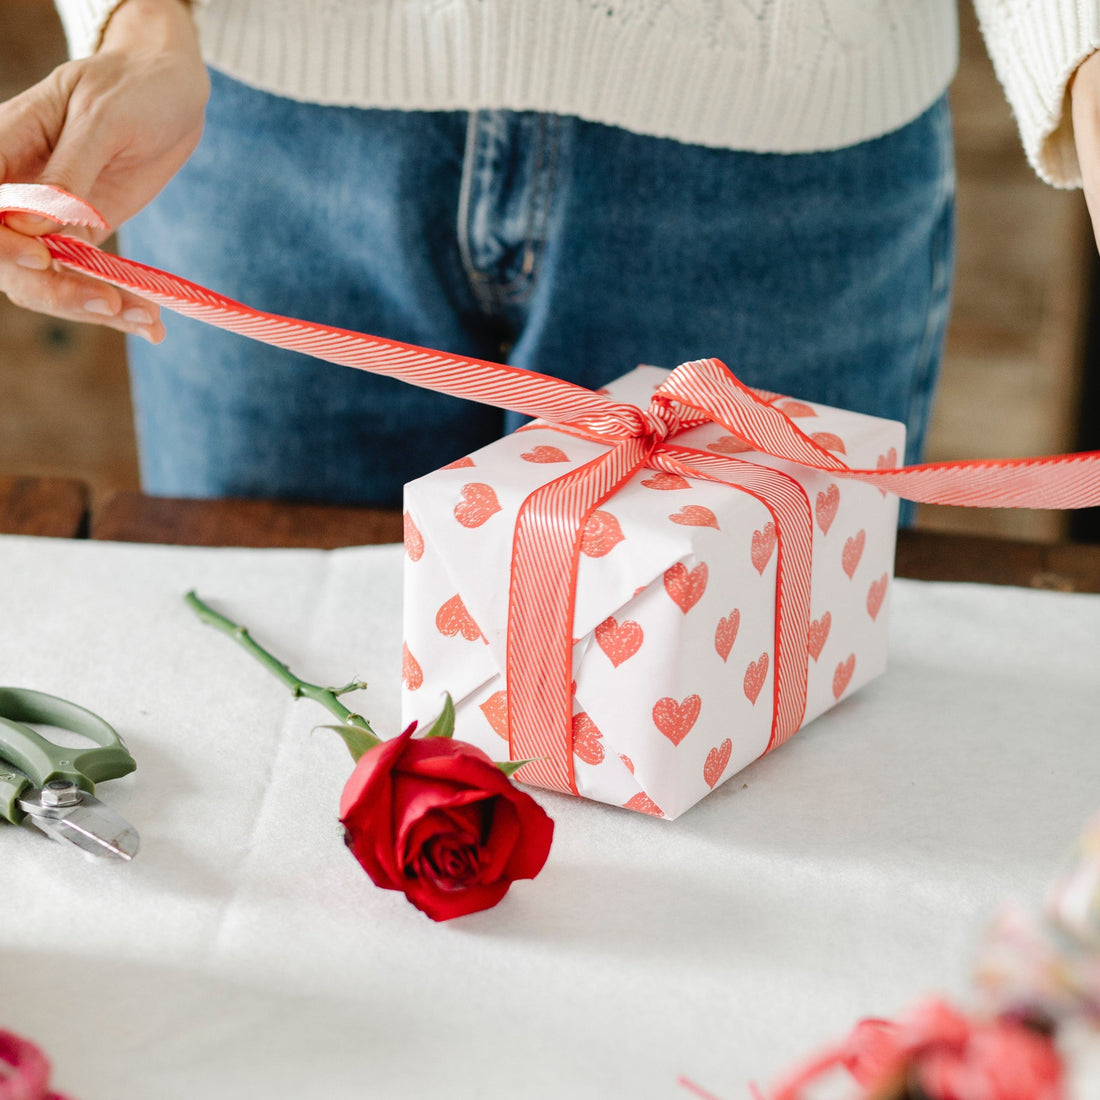 Romantic Photo Gifts for Her